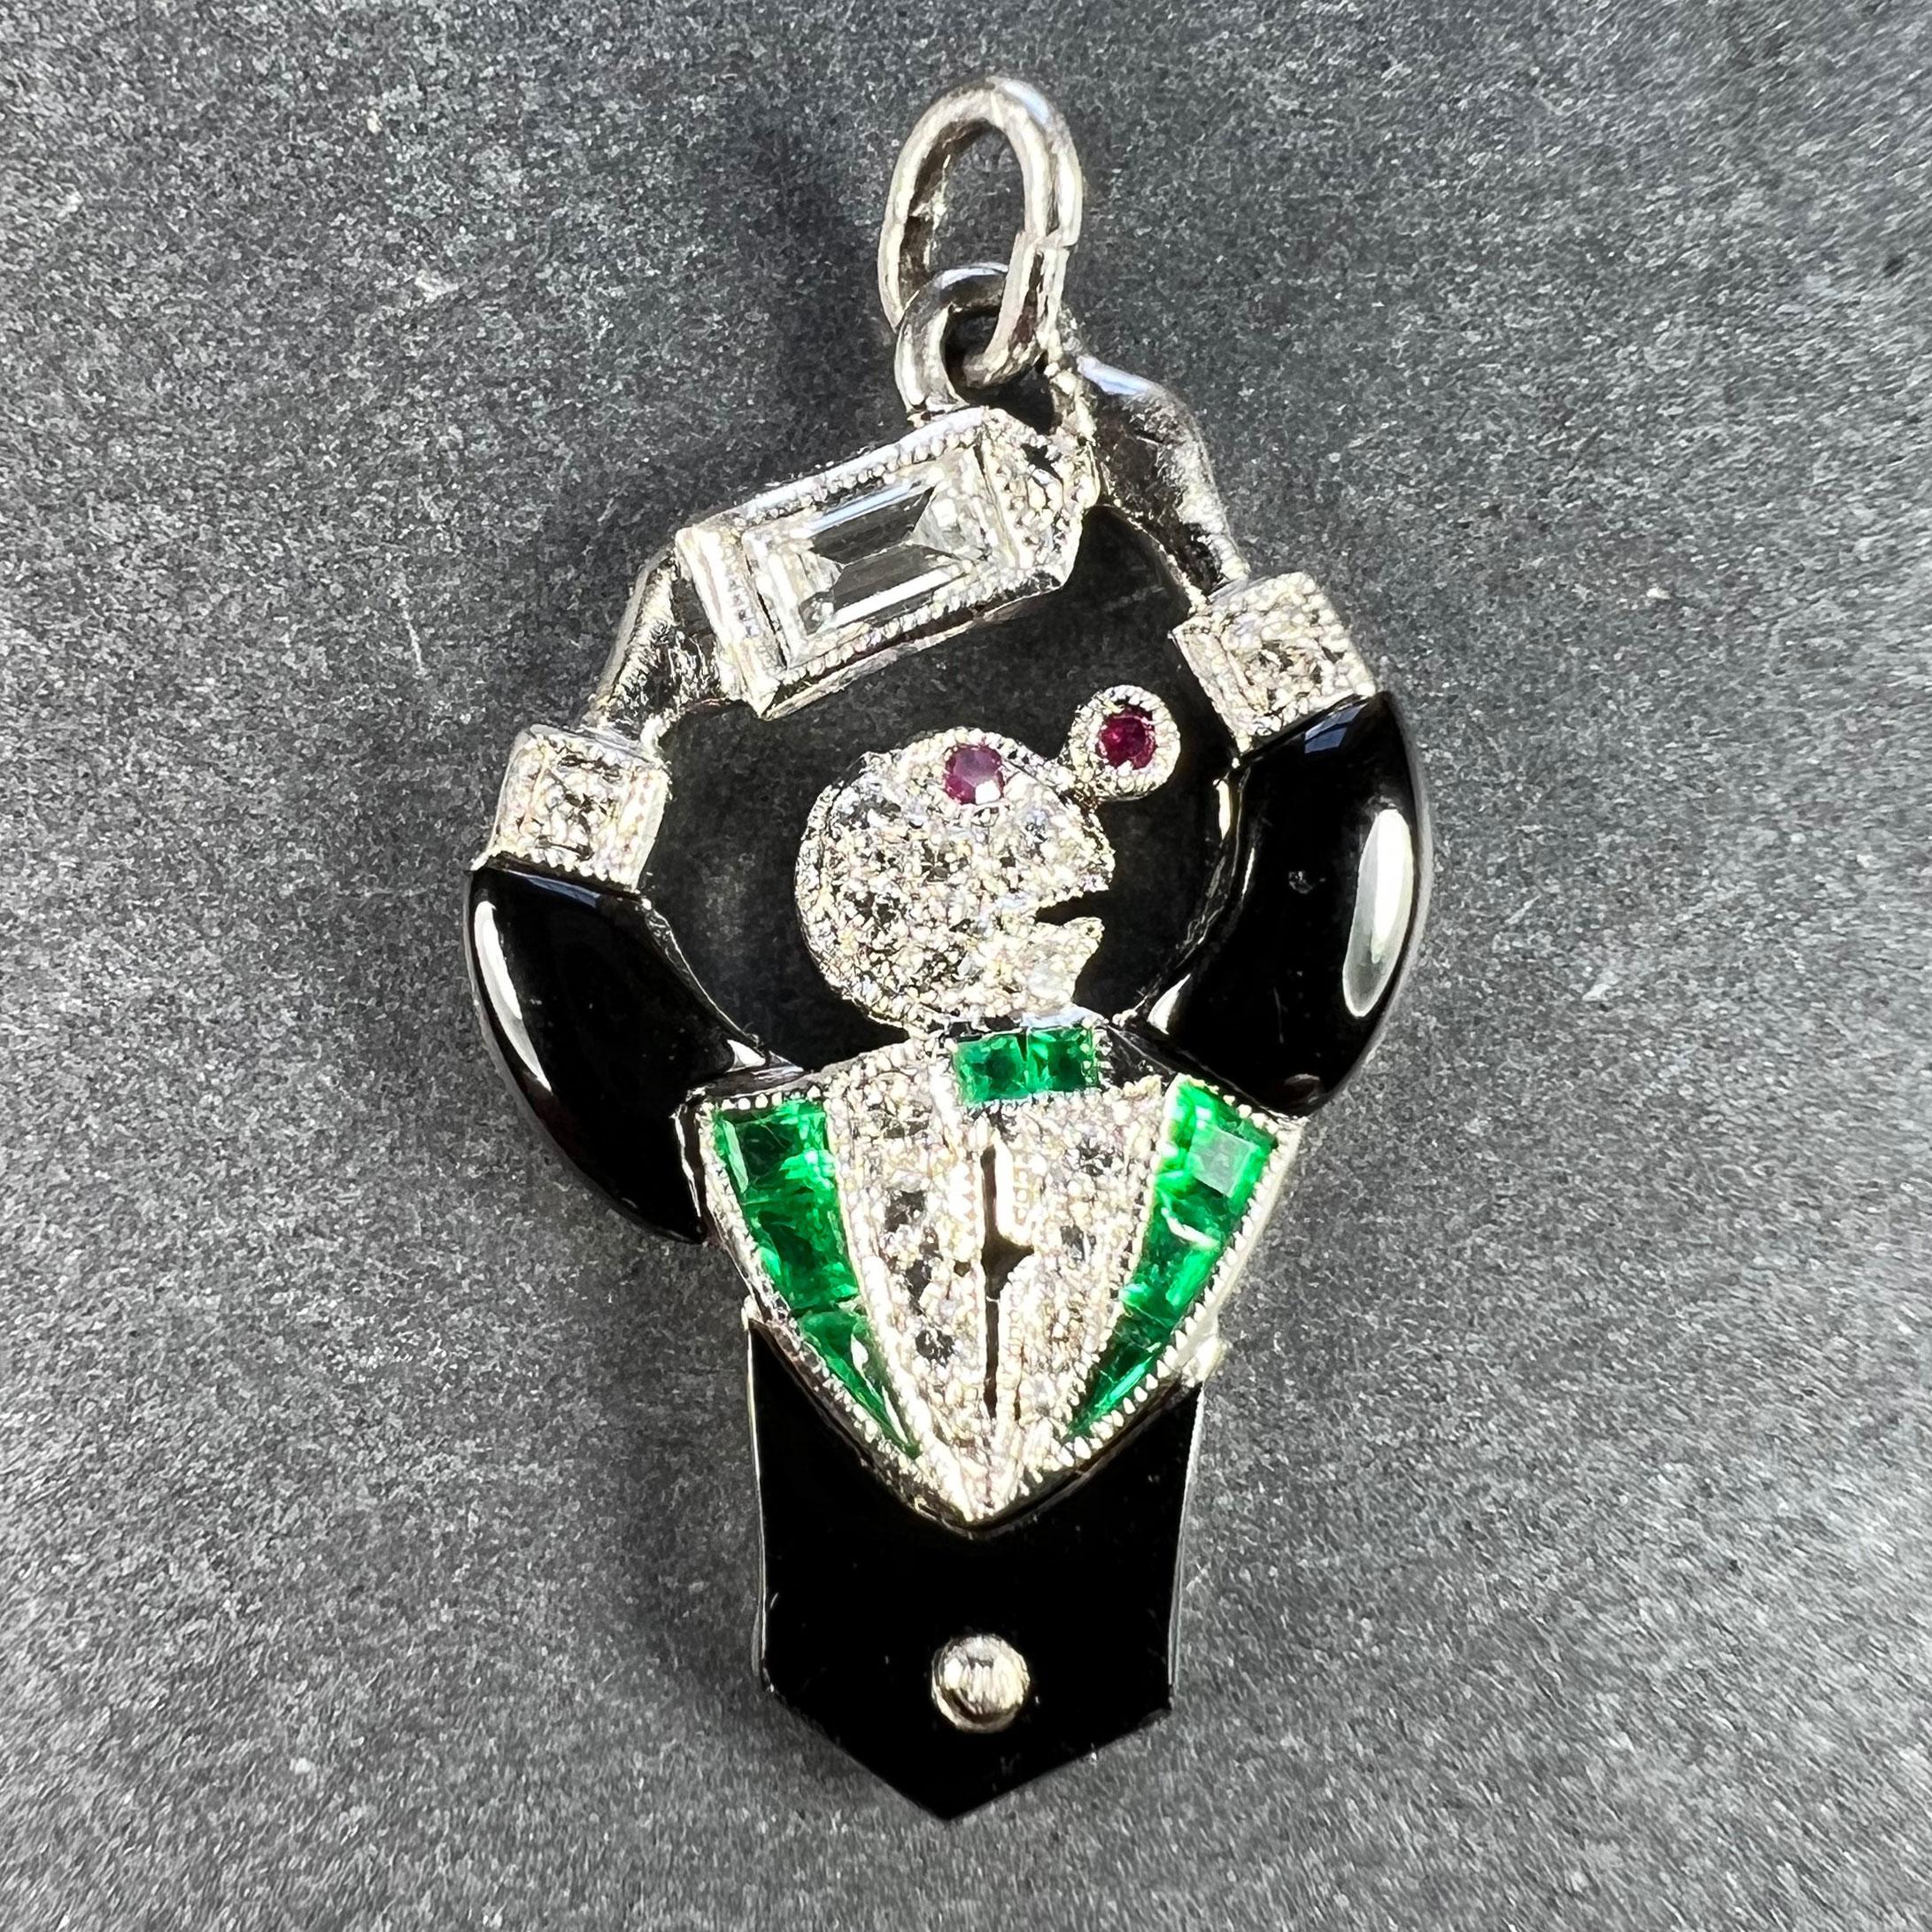 An Art Deco platinum charm pendant designed as a cocktail waiter or bartender mixing a martini or similar drink. Set with carved onyx to represent the jacket, one emerald cut diamond and 13 round brilliant cut diamonds with a total estimated weight